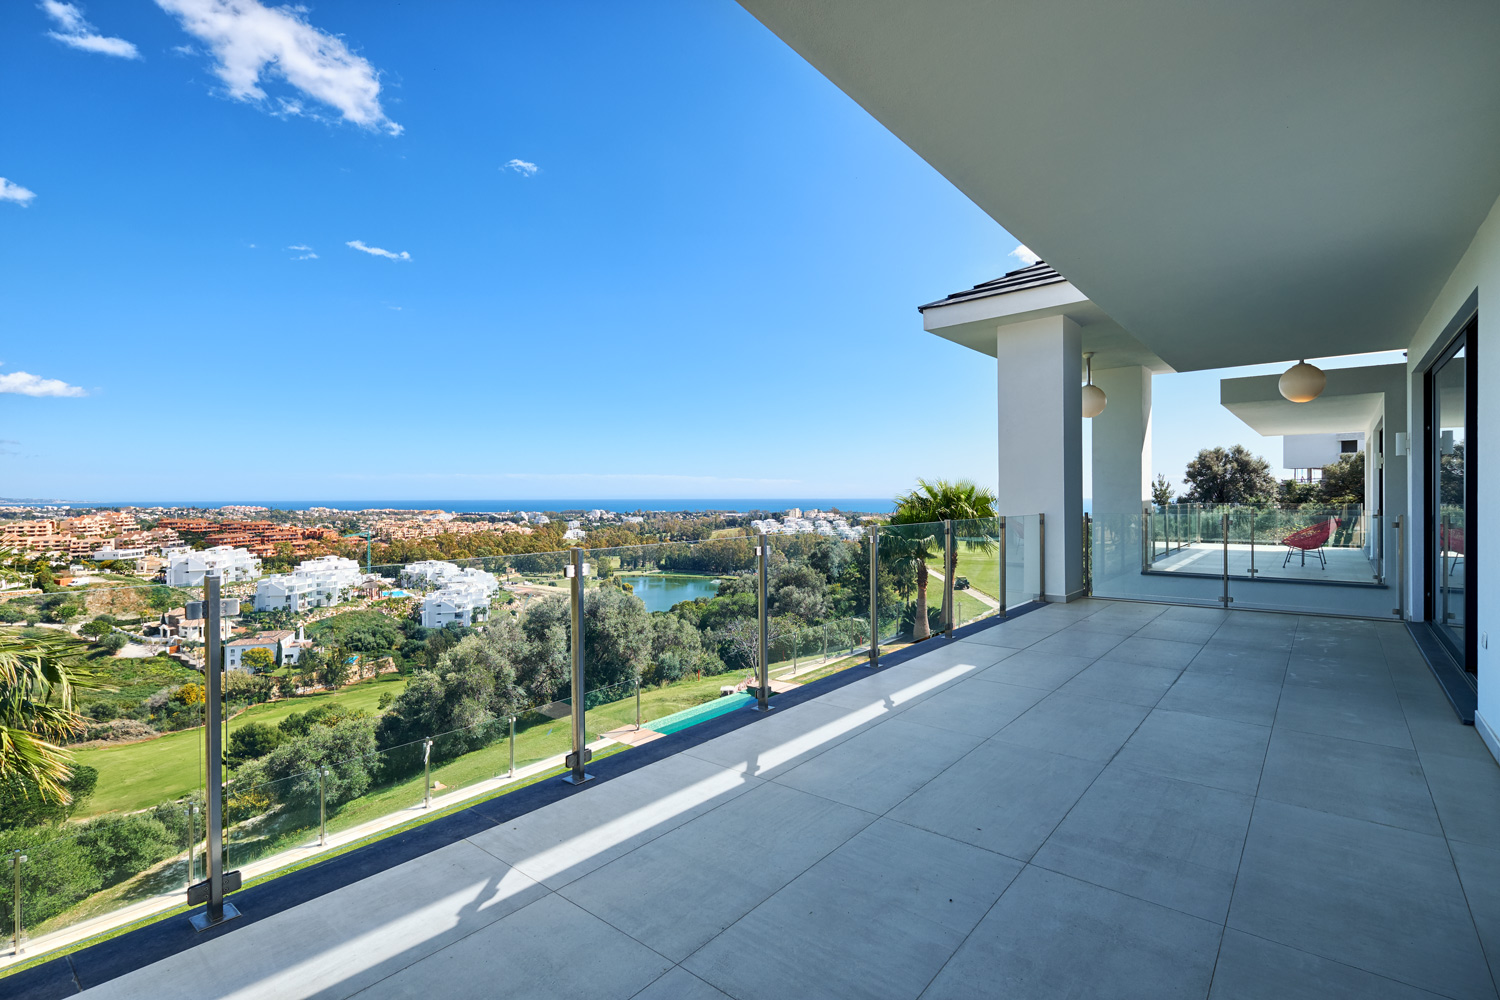 SOLD! SPECTACULAR DESIGN VILLA SITUATED IN URB. NEW WATCHTOWER, LA ALQUERÍA